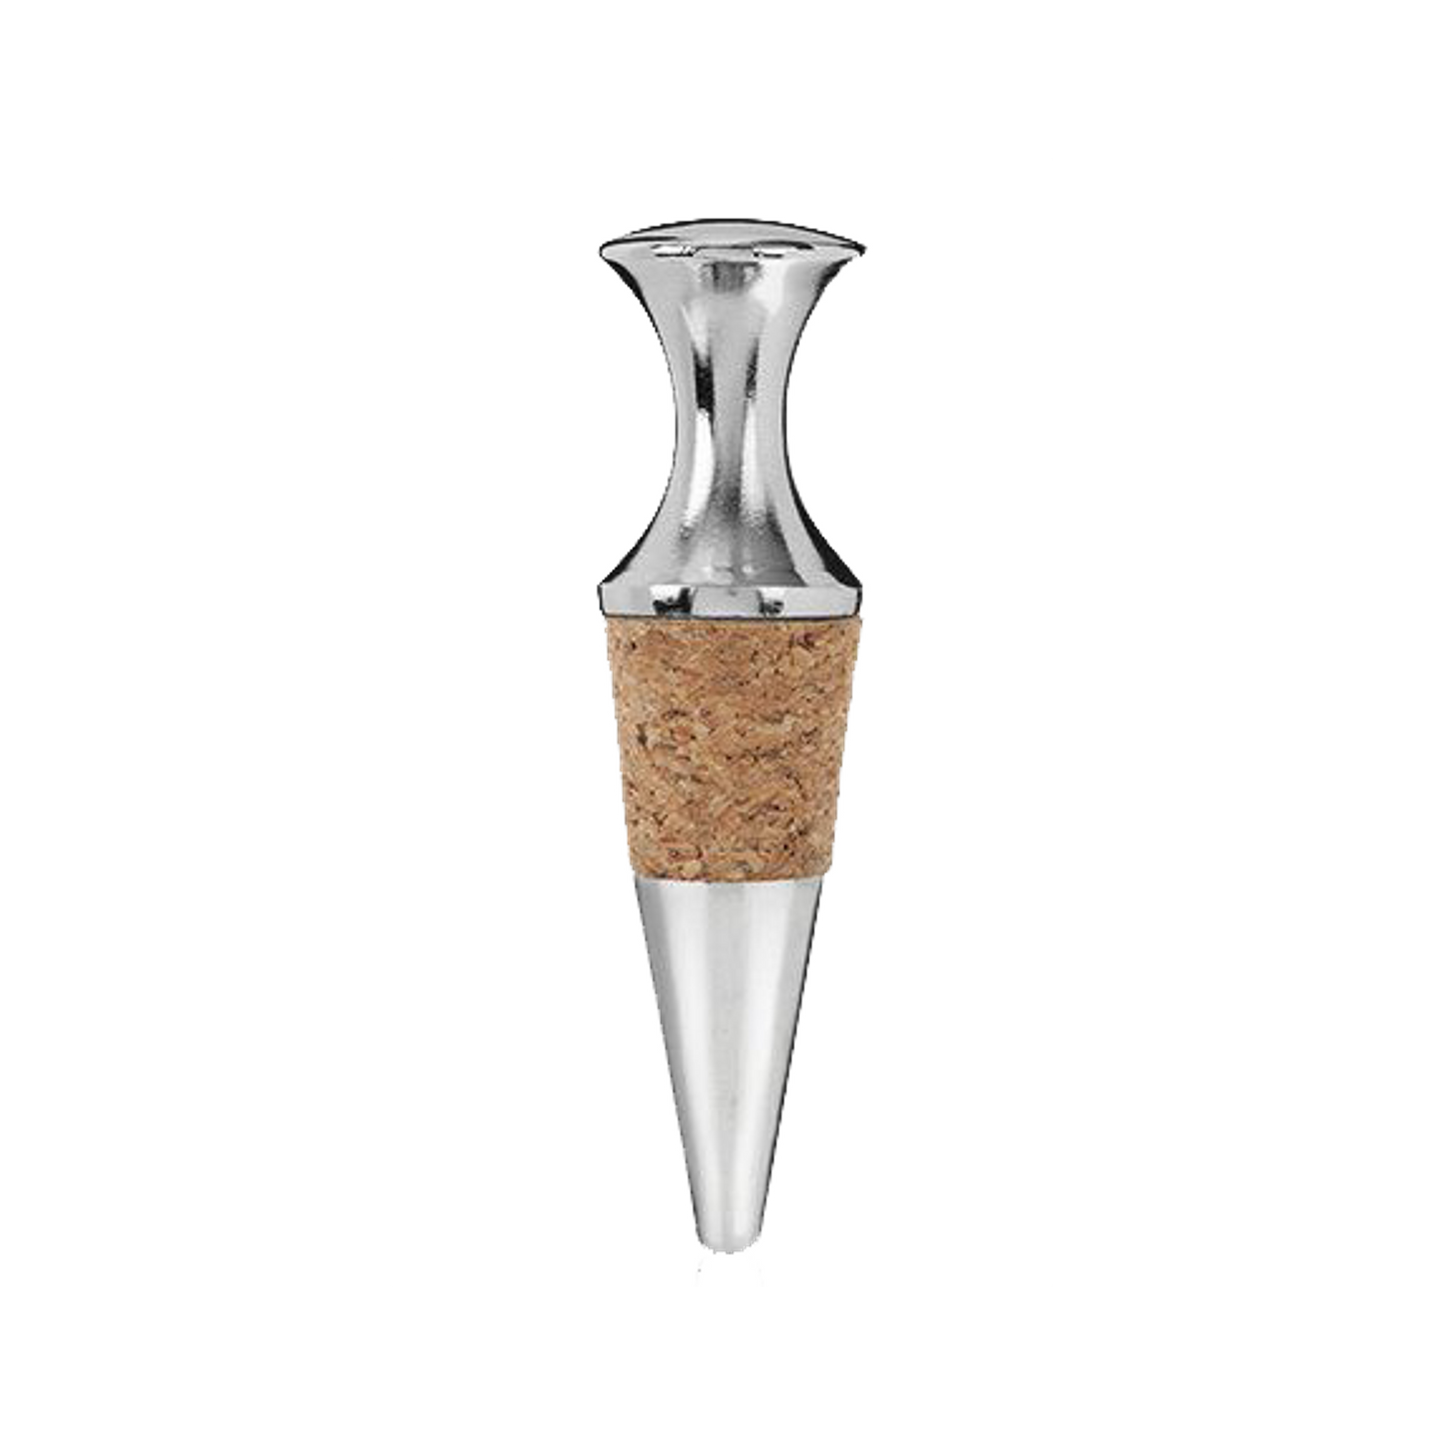 A wine bottle stopper with a cork seal and a chrome finish